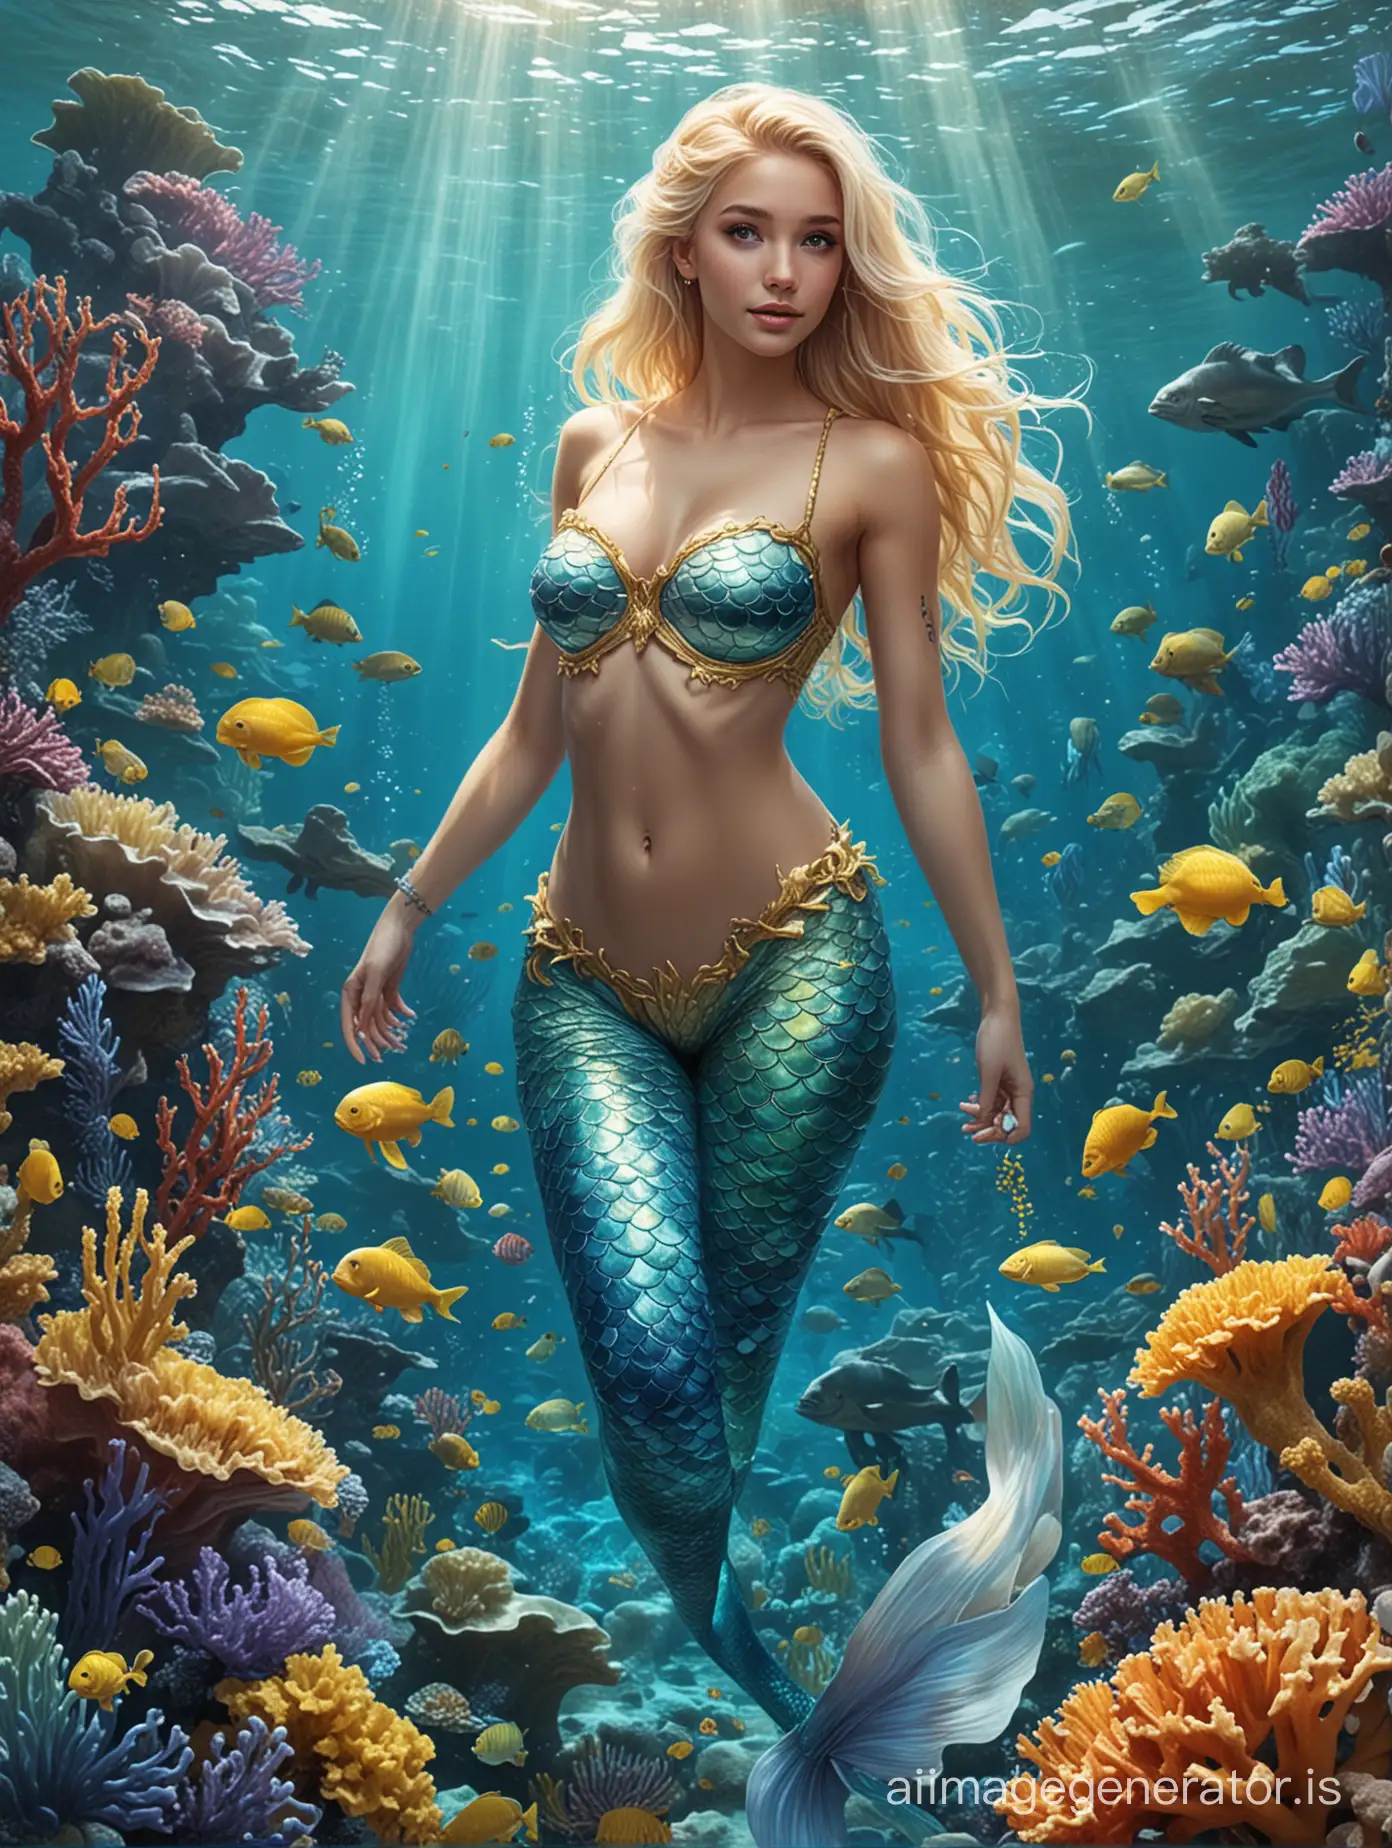 A mermaid with light skin, blonde hair, and an yellow tail with veins of blue , her crop bustier was cyan colored and she is swimming under the ocean alongside colorful Seahorses and corals.